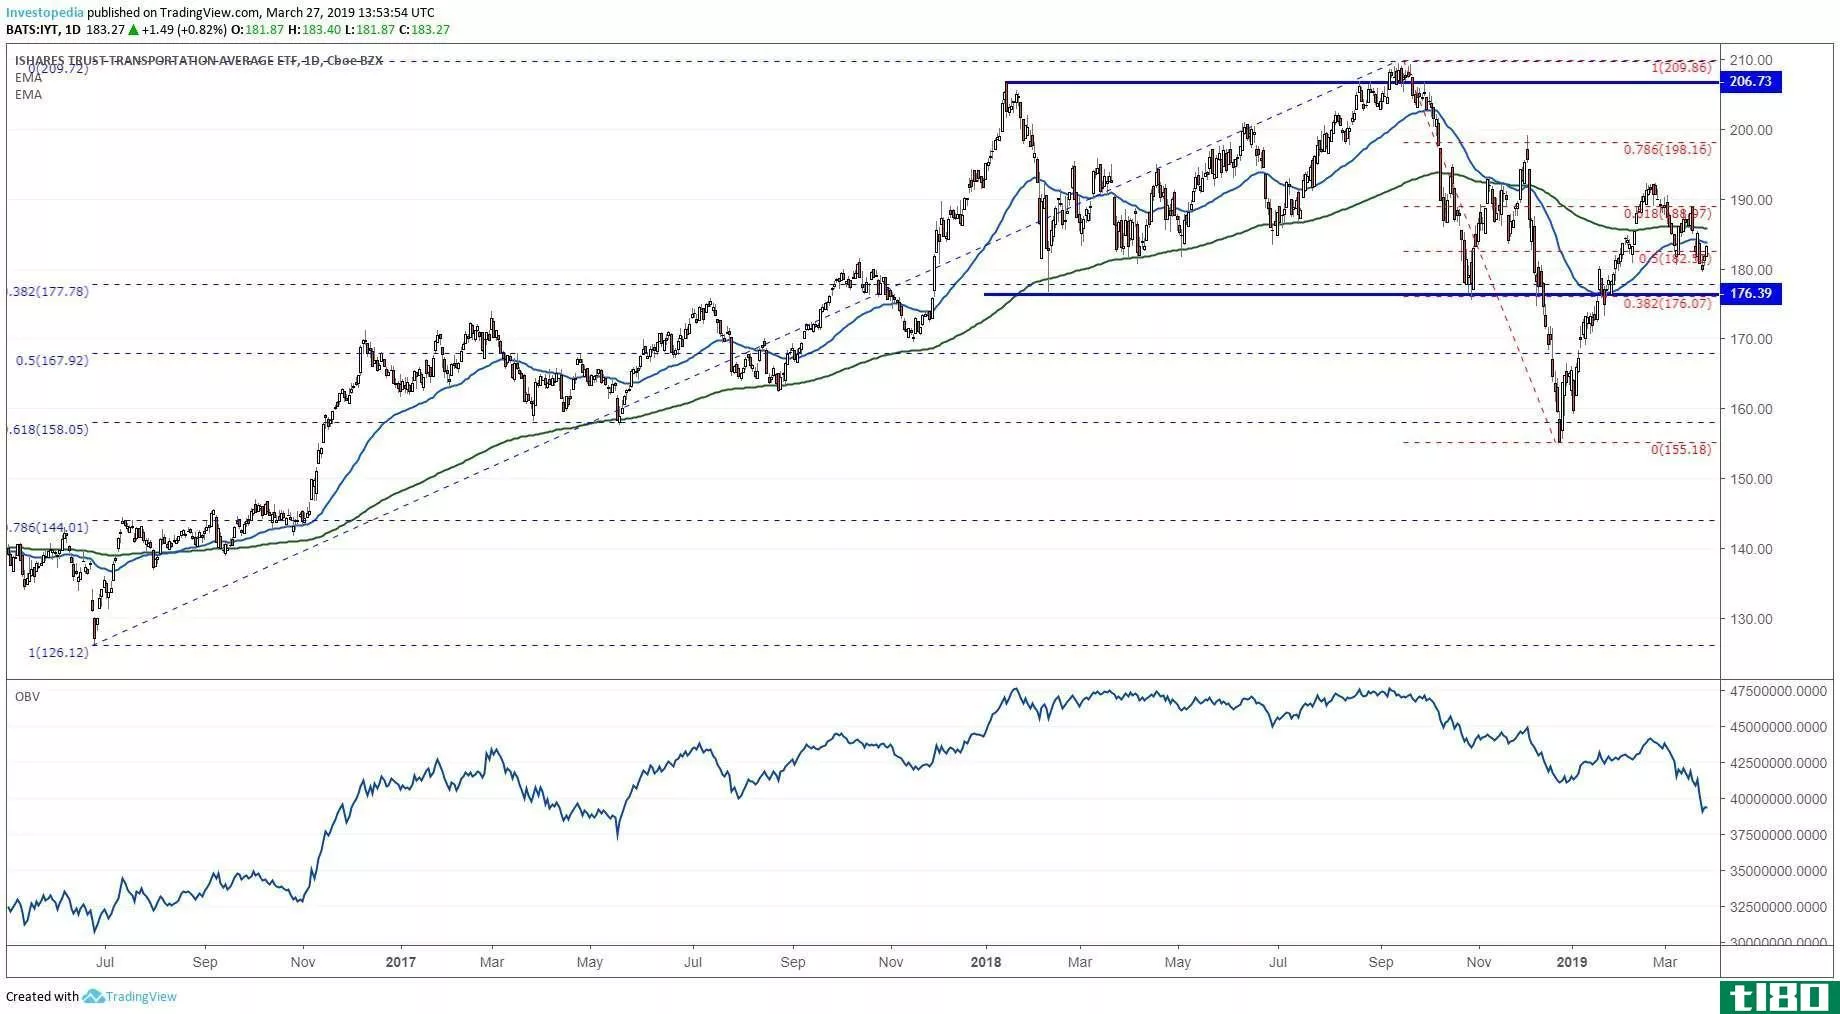 Technical chart showing the share price performance of the iShares Dow Jones Transportation Average Index Fund ETF (IYT)